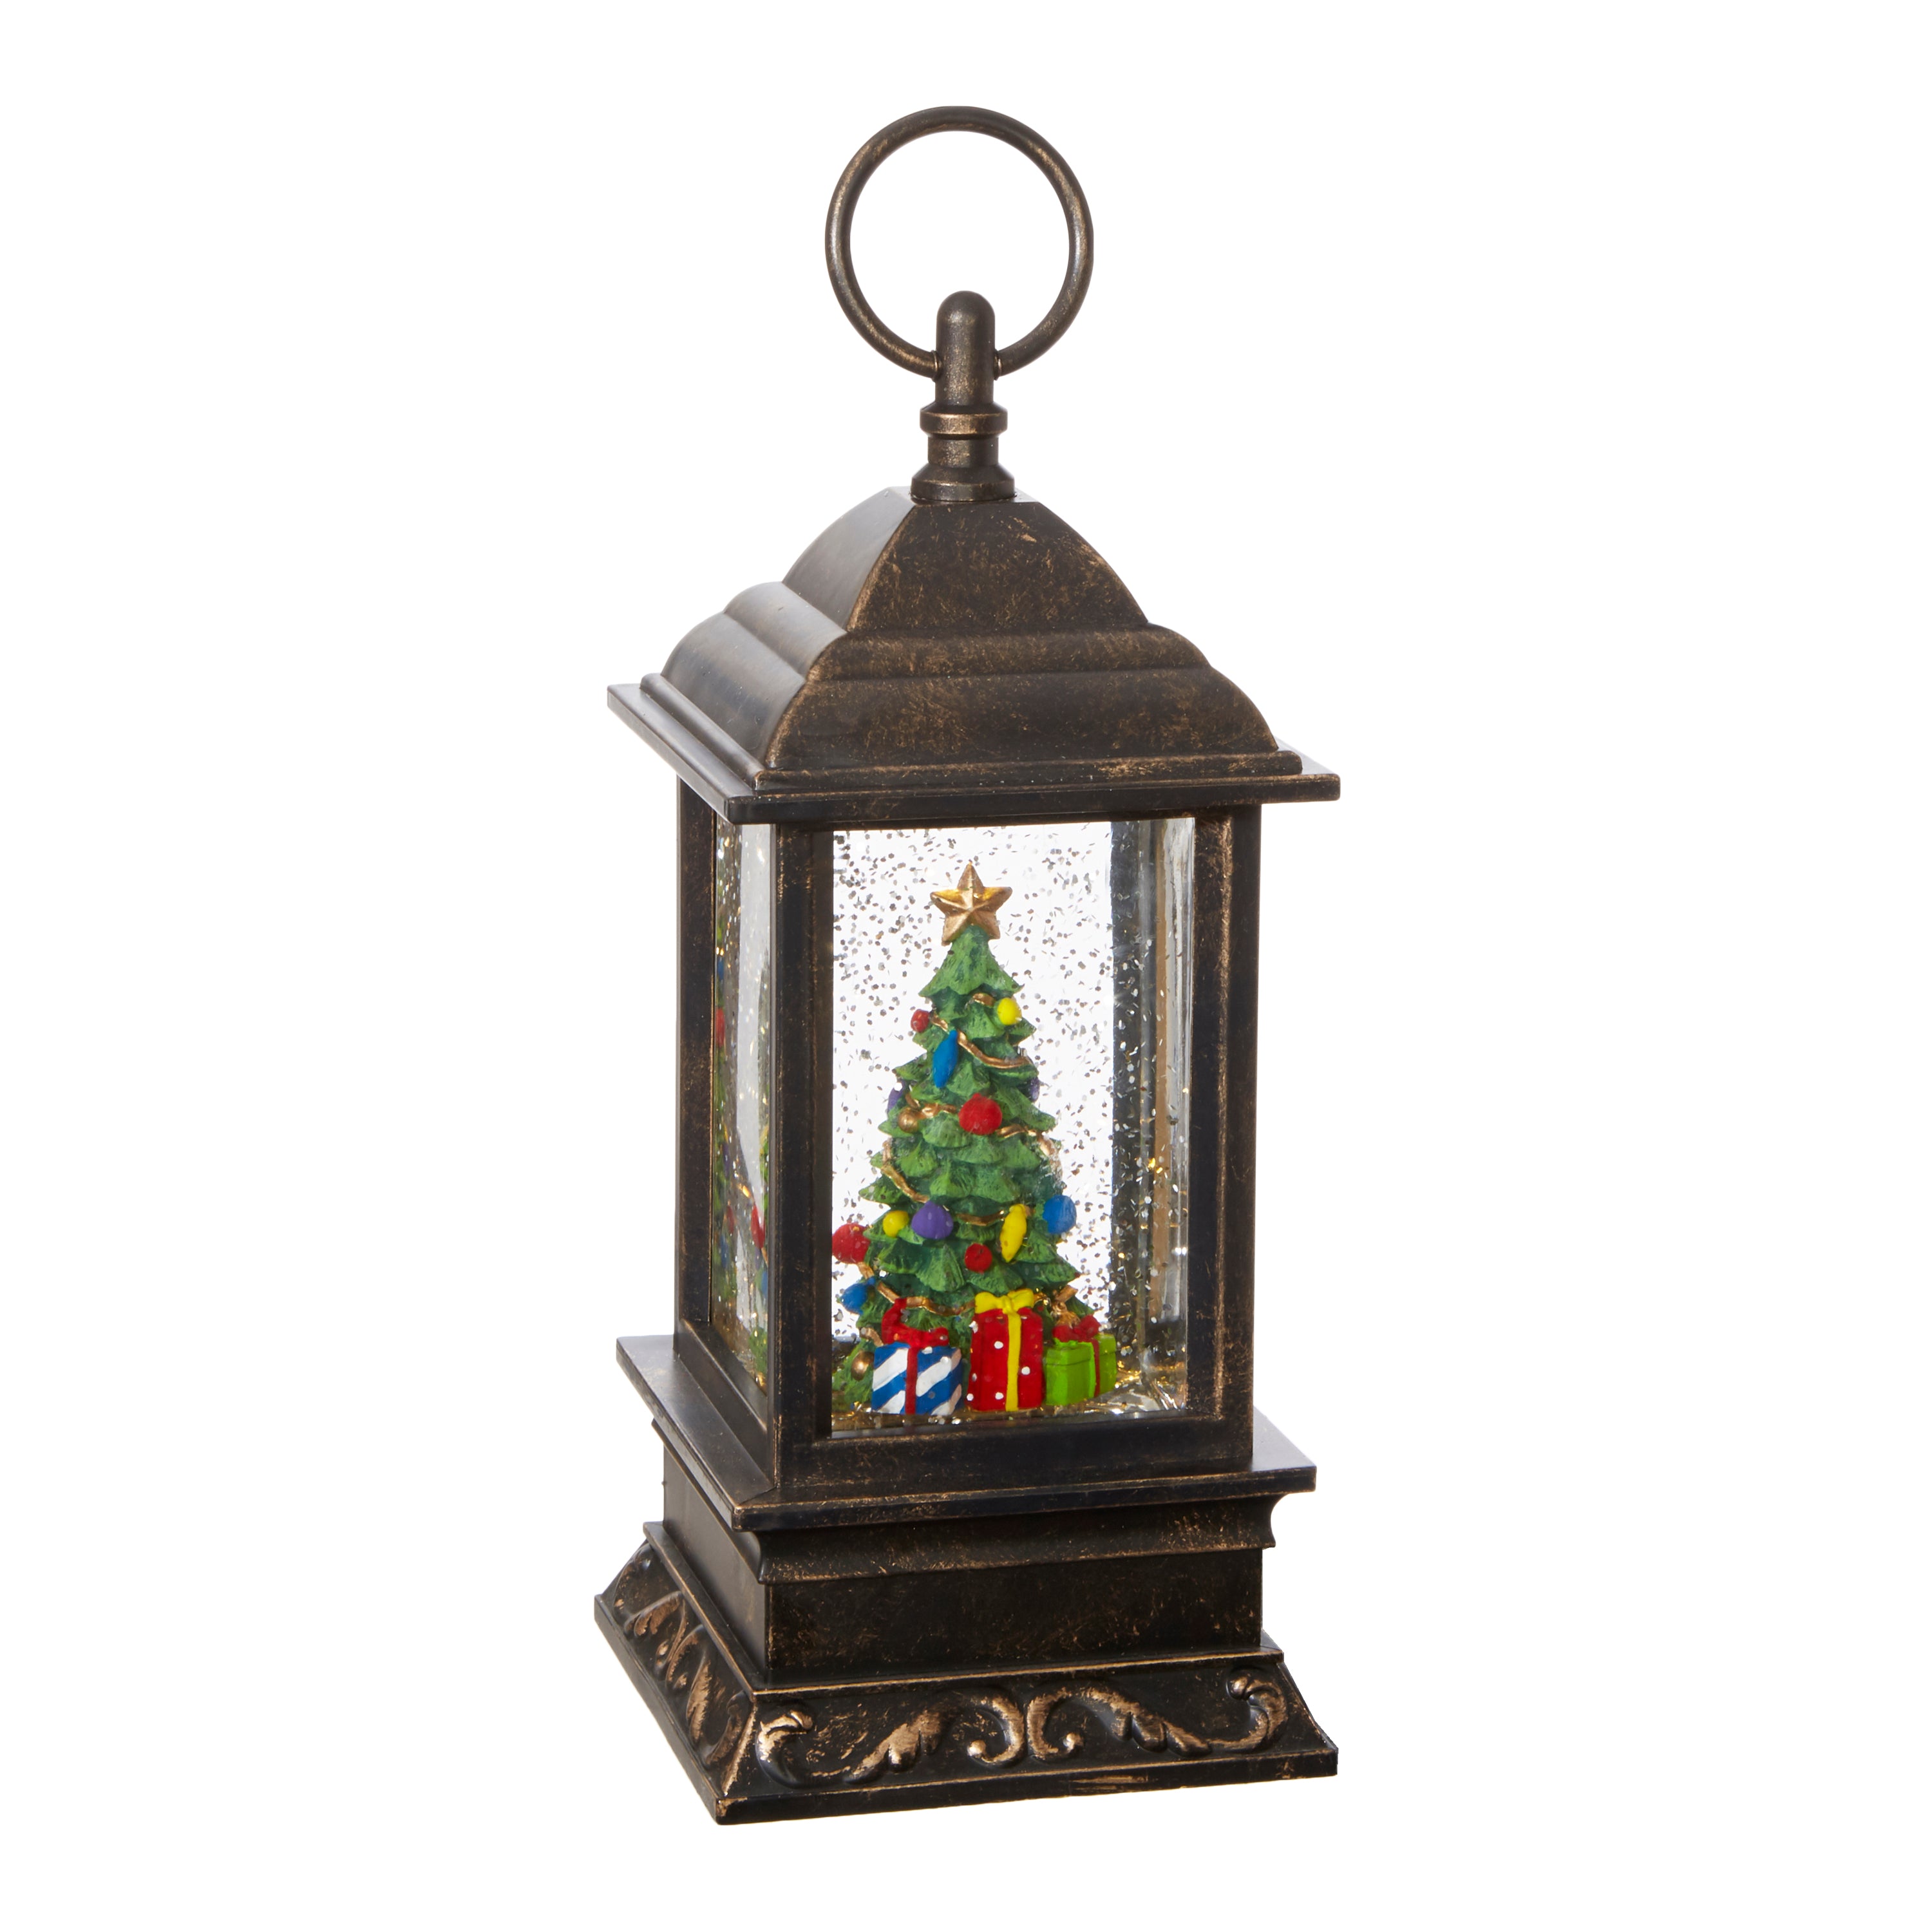 Lighted Christmas Tree in Water Lantern